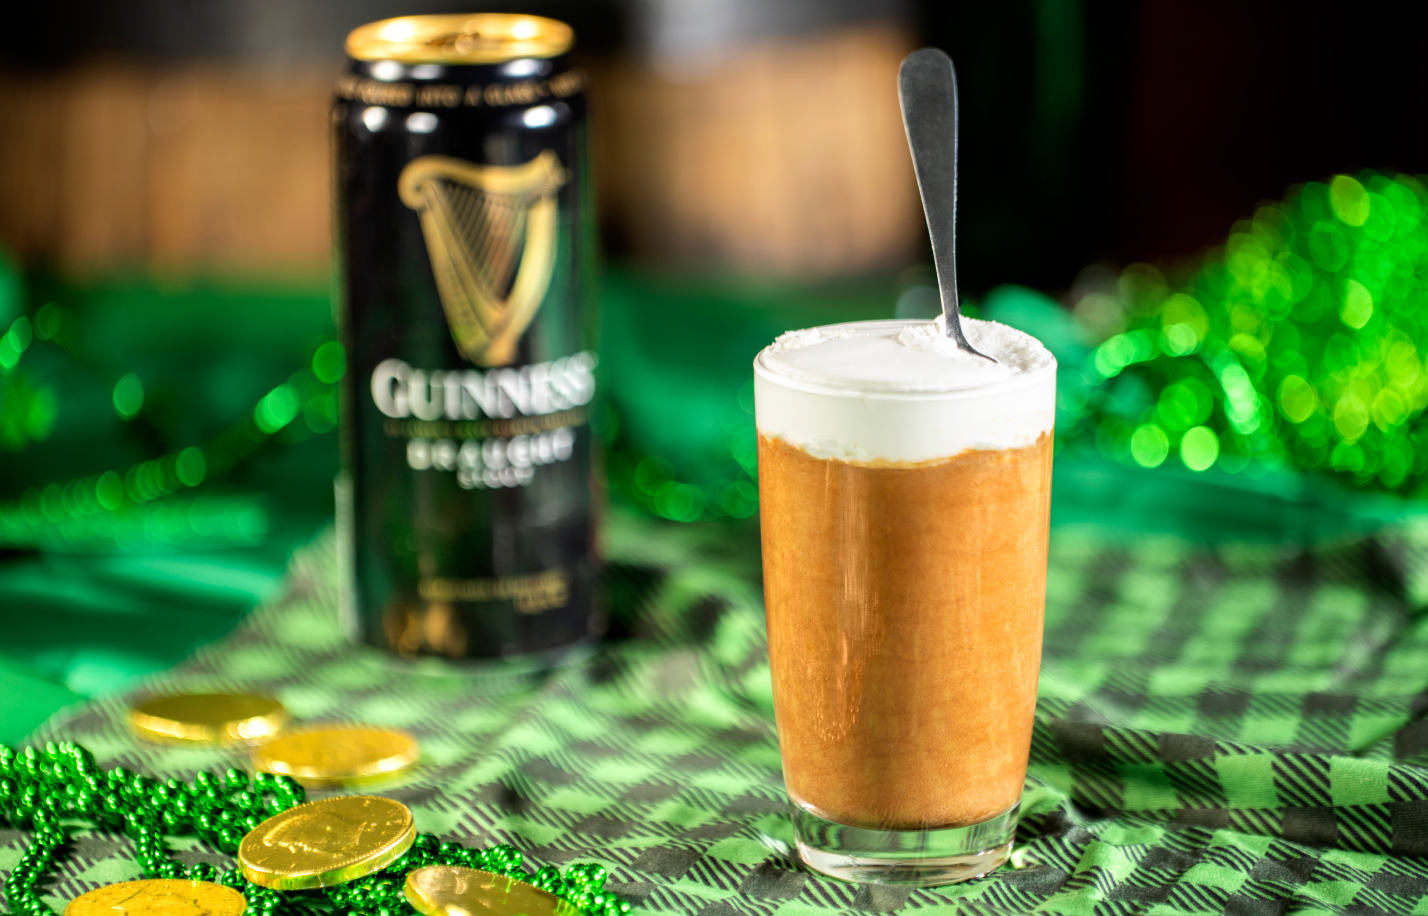  Irish-themed fare like Guinness® mousse available at Busch Gardens Williamsburg St. Patrick's Day Celebration.